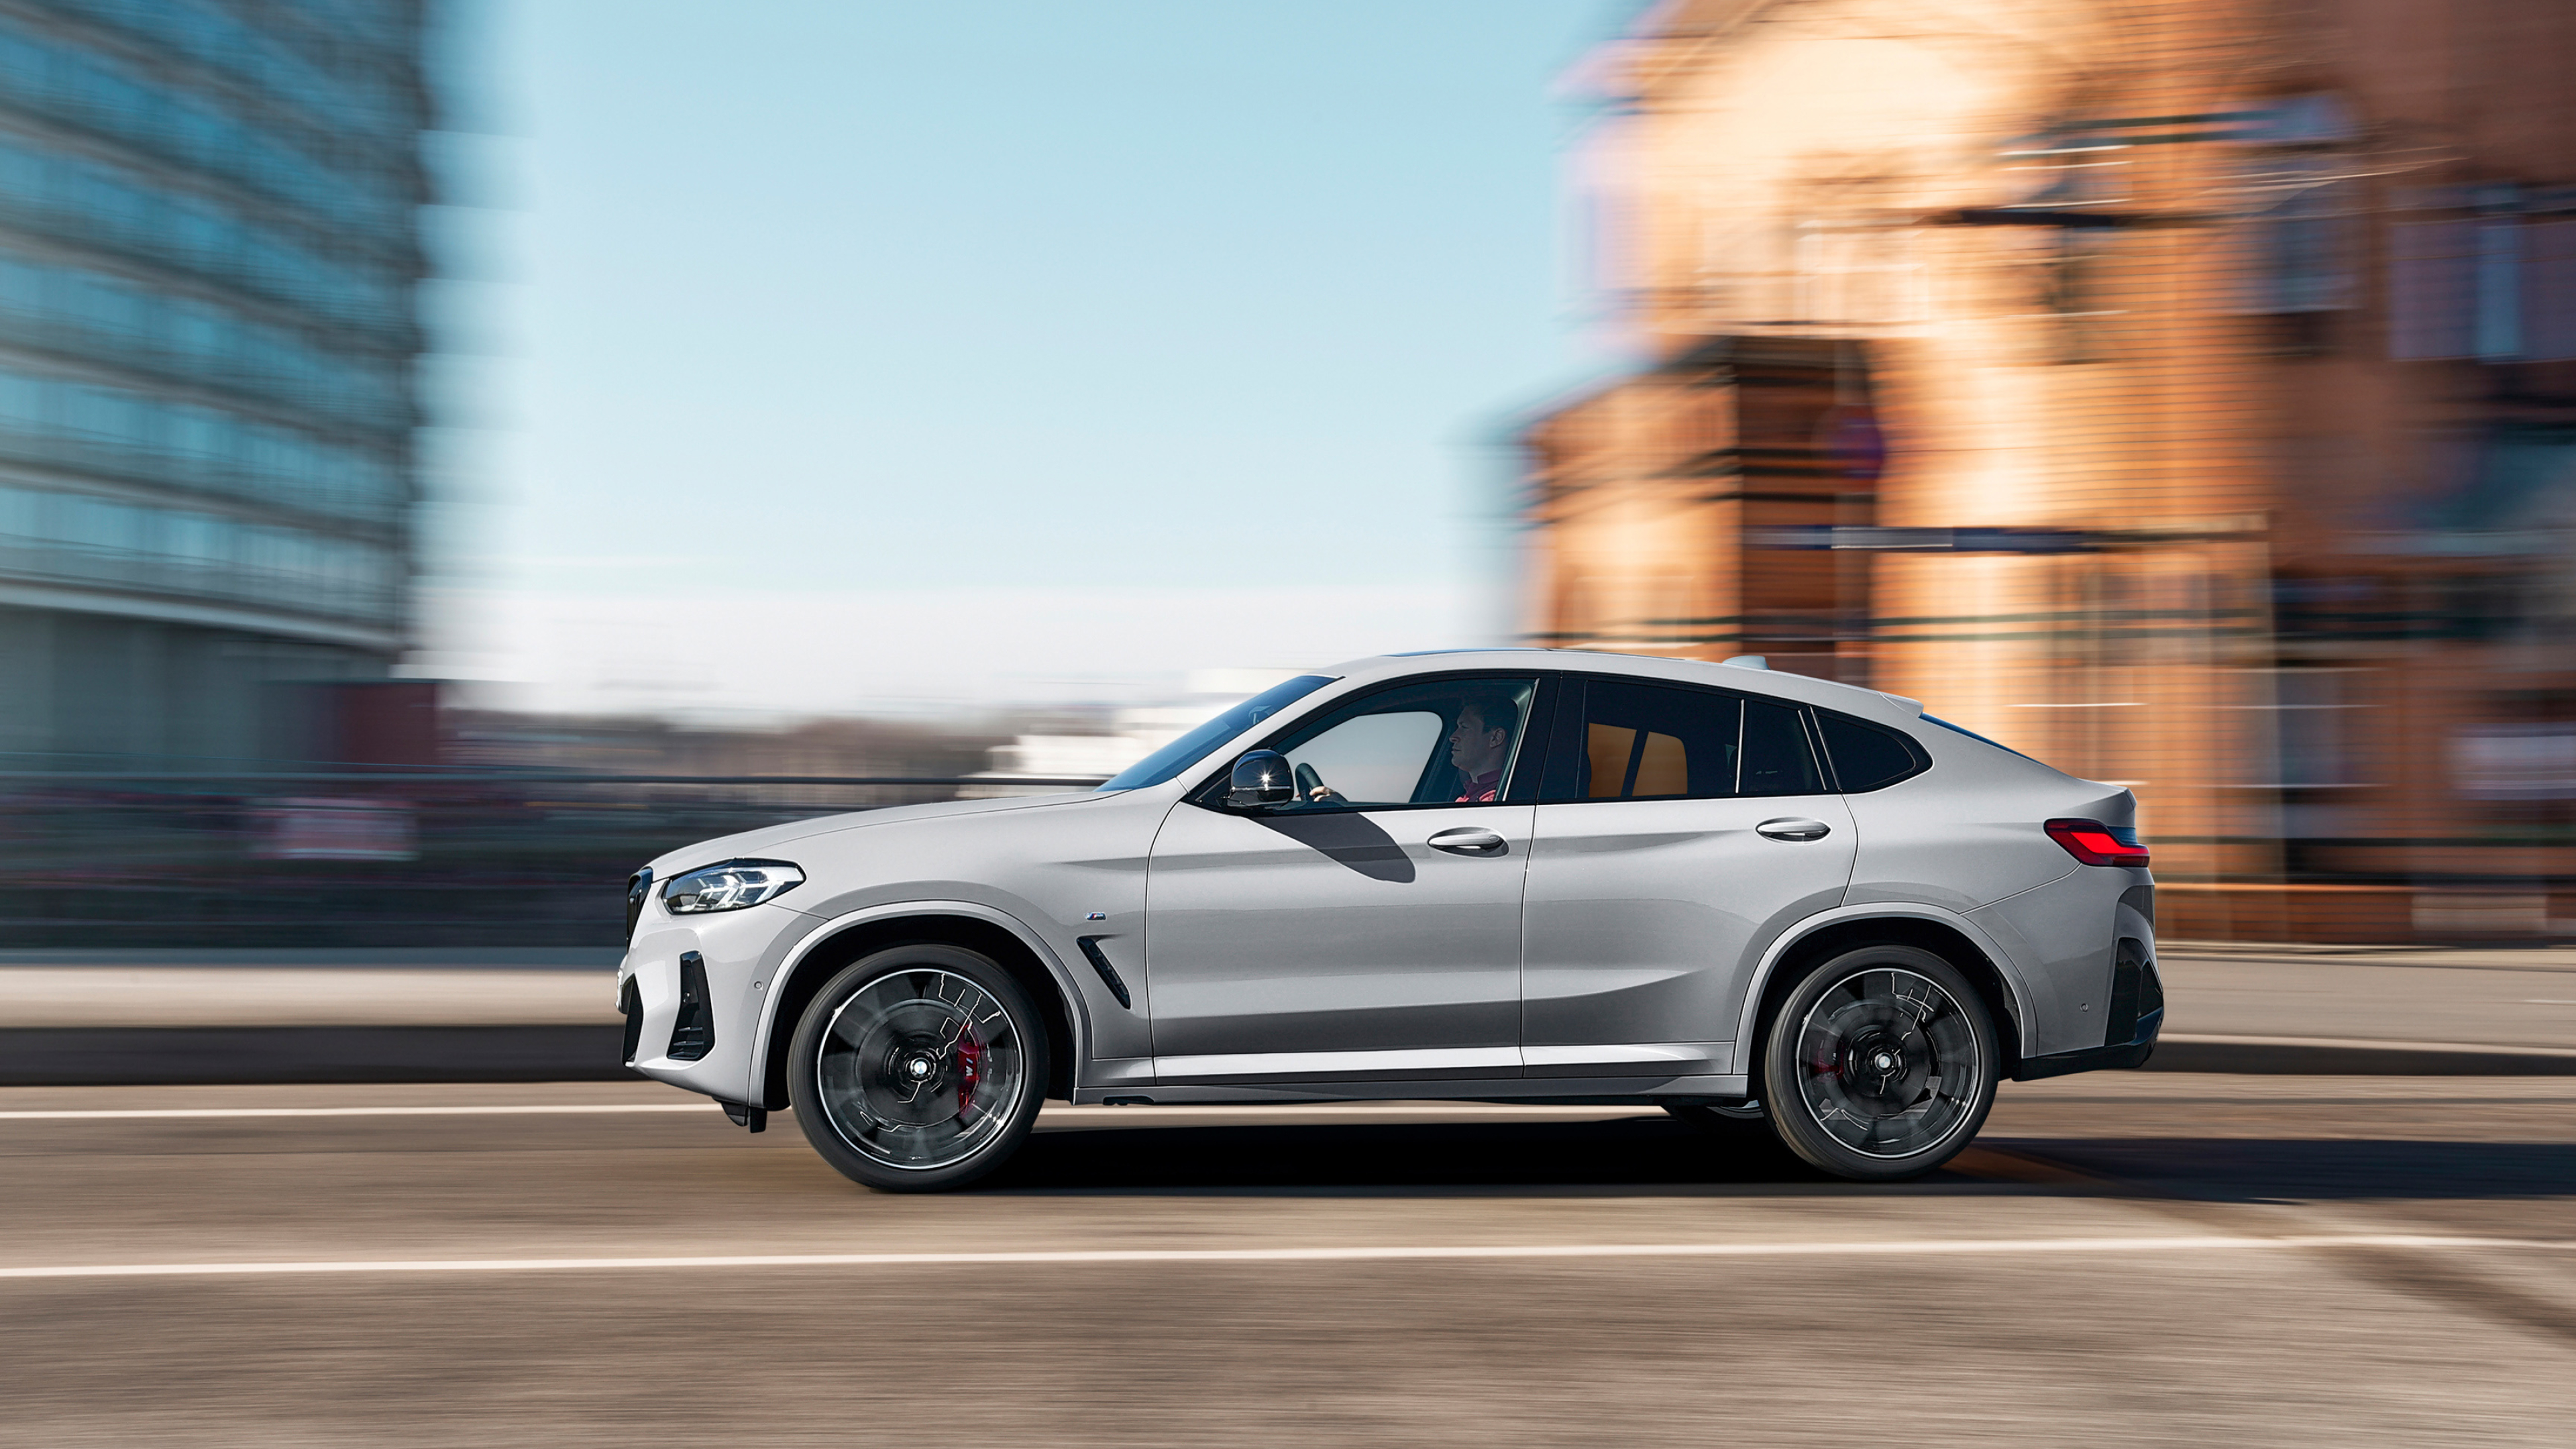 BMW X4, Striking design, Exceptional agility, State-of-the-art technology, 3840x2160 4K Desktop